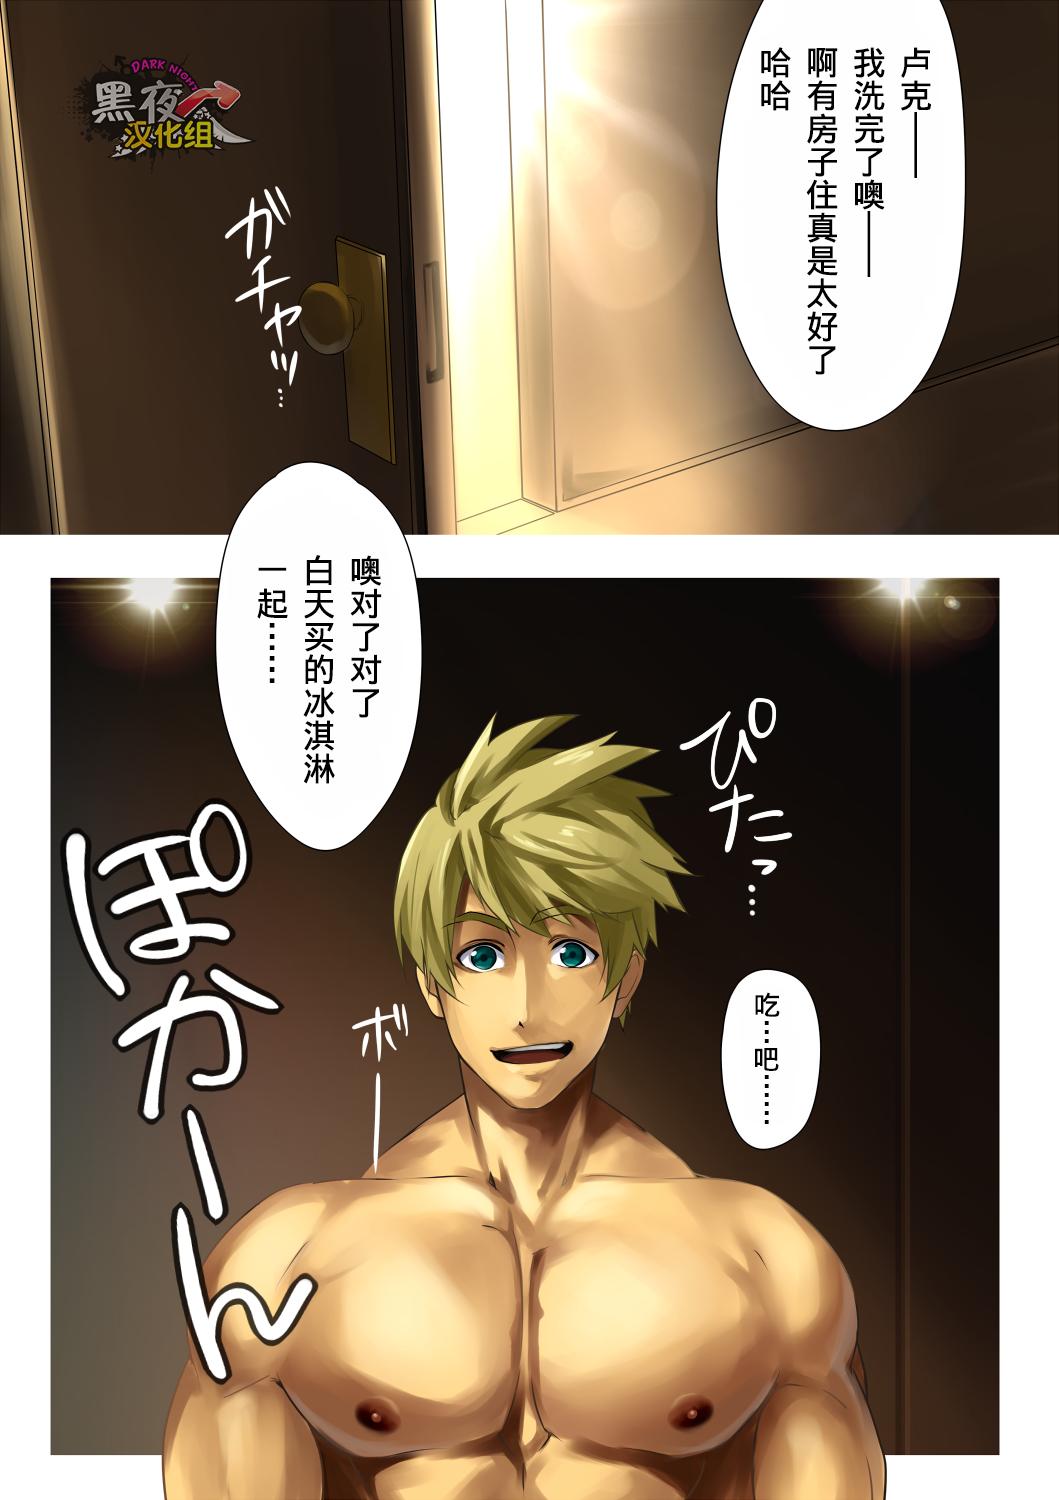 Free Amatuer Porn malemilk - Tales of the abyss Boquete - Page 7